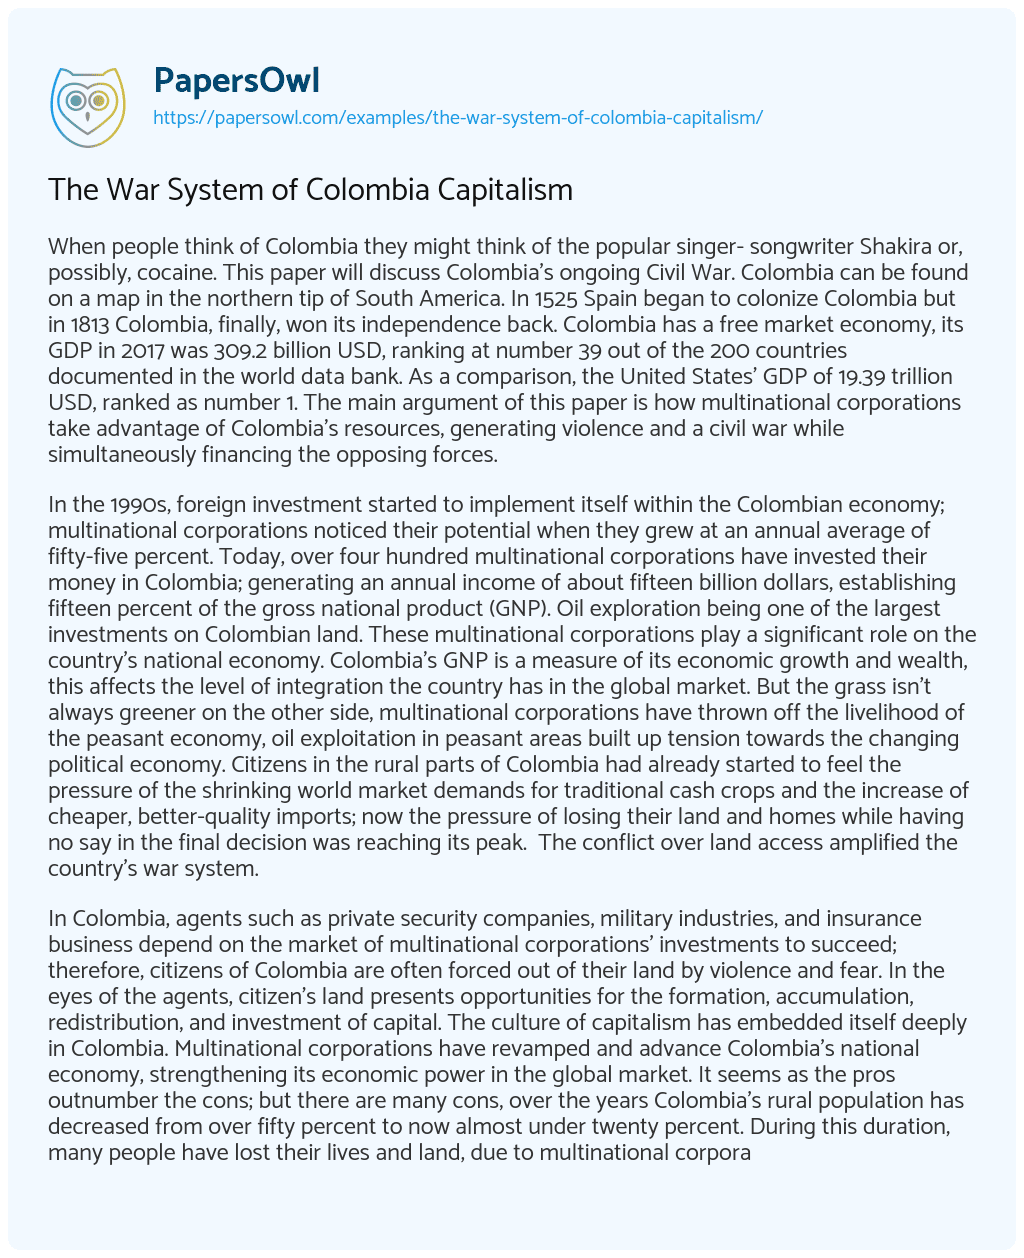 The War System of Colombia Capitalism essay